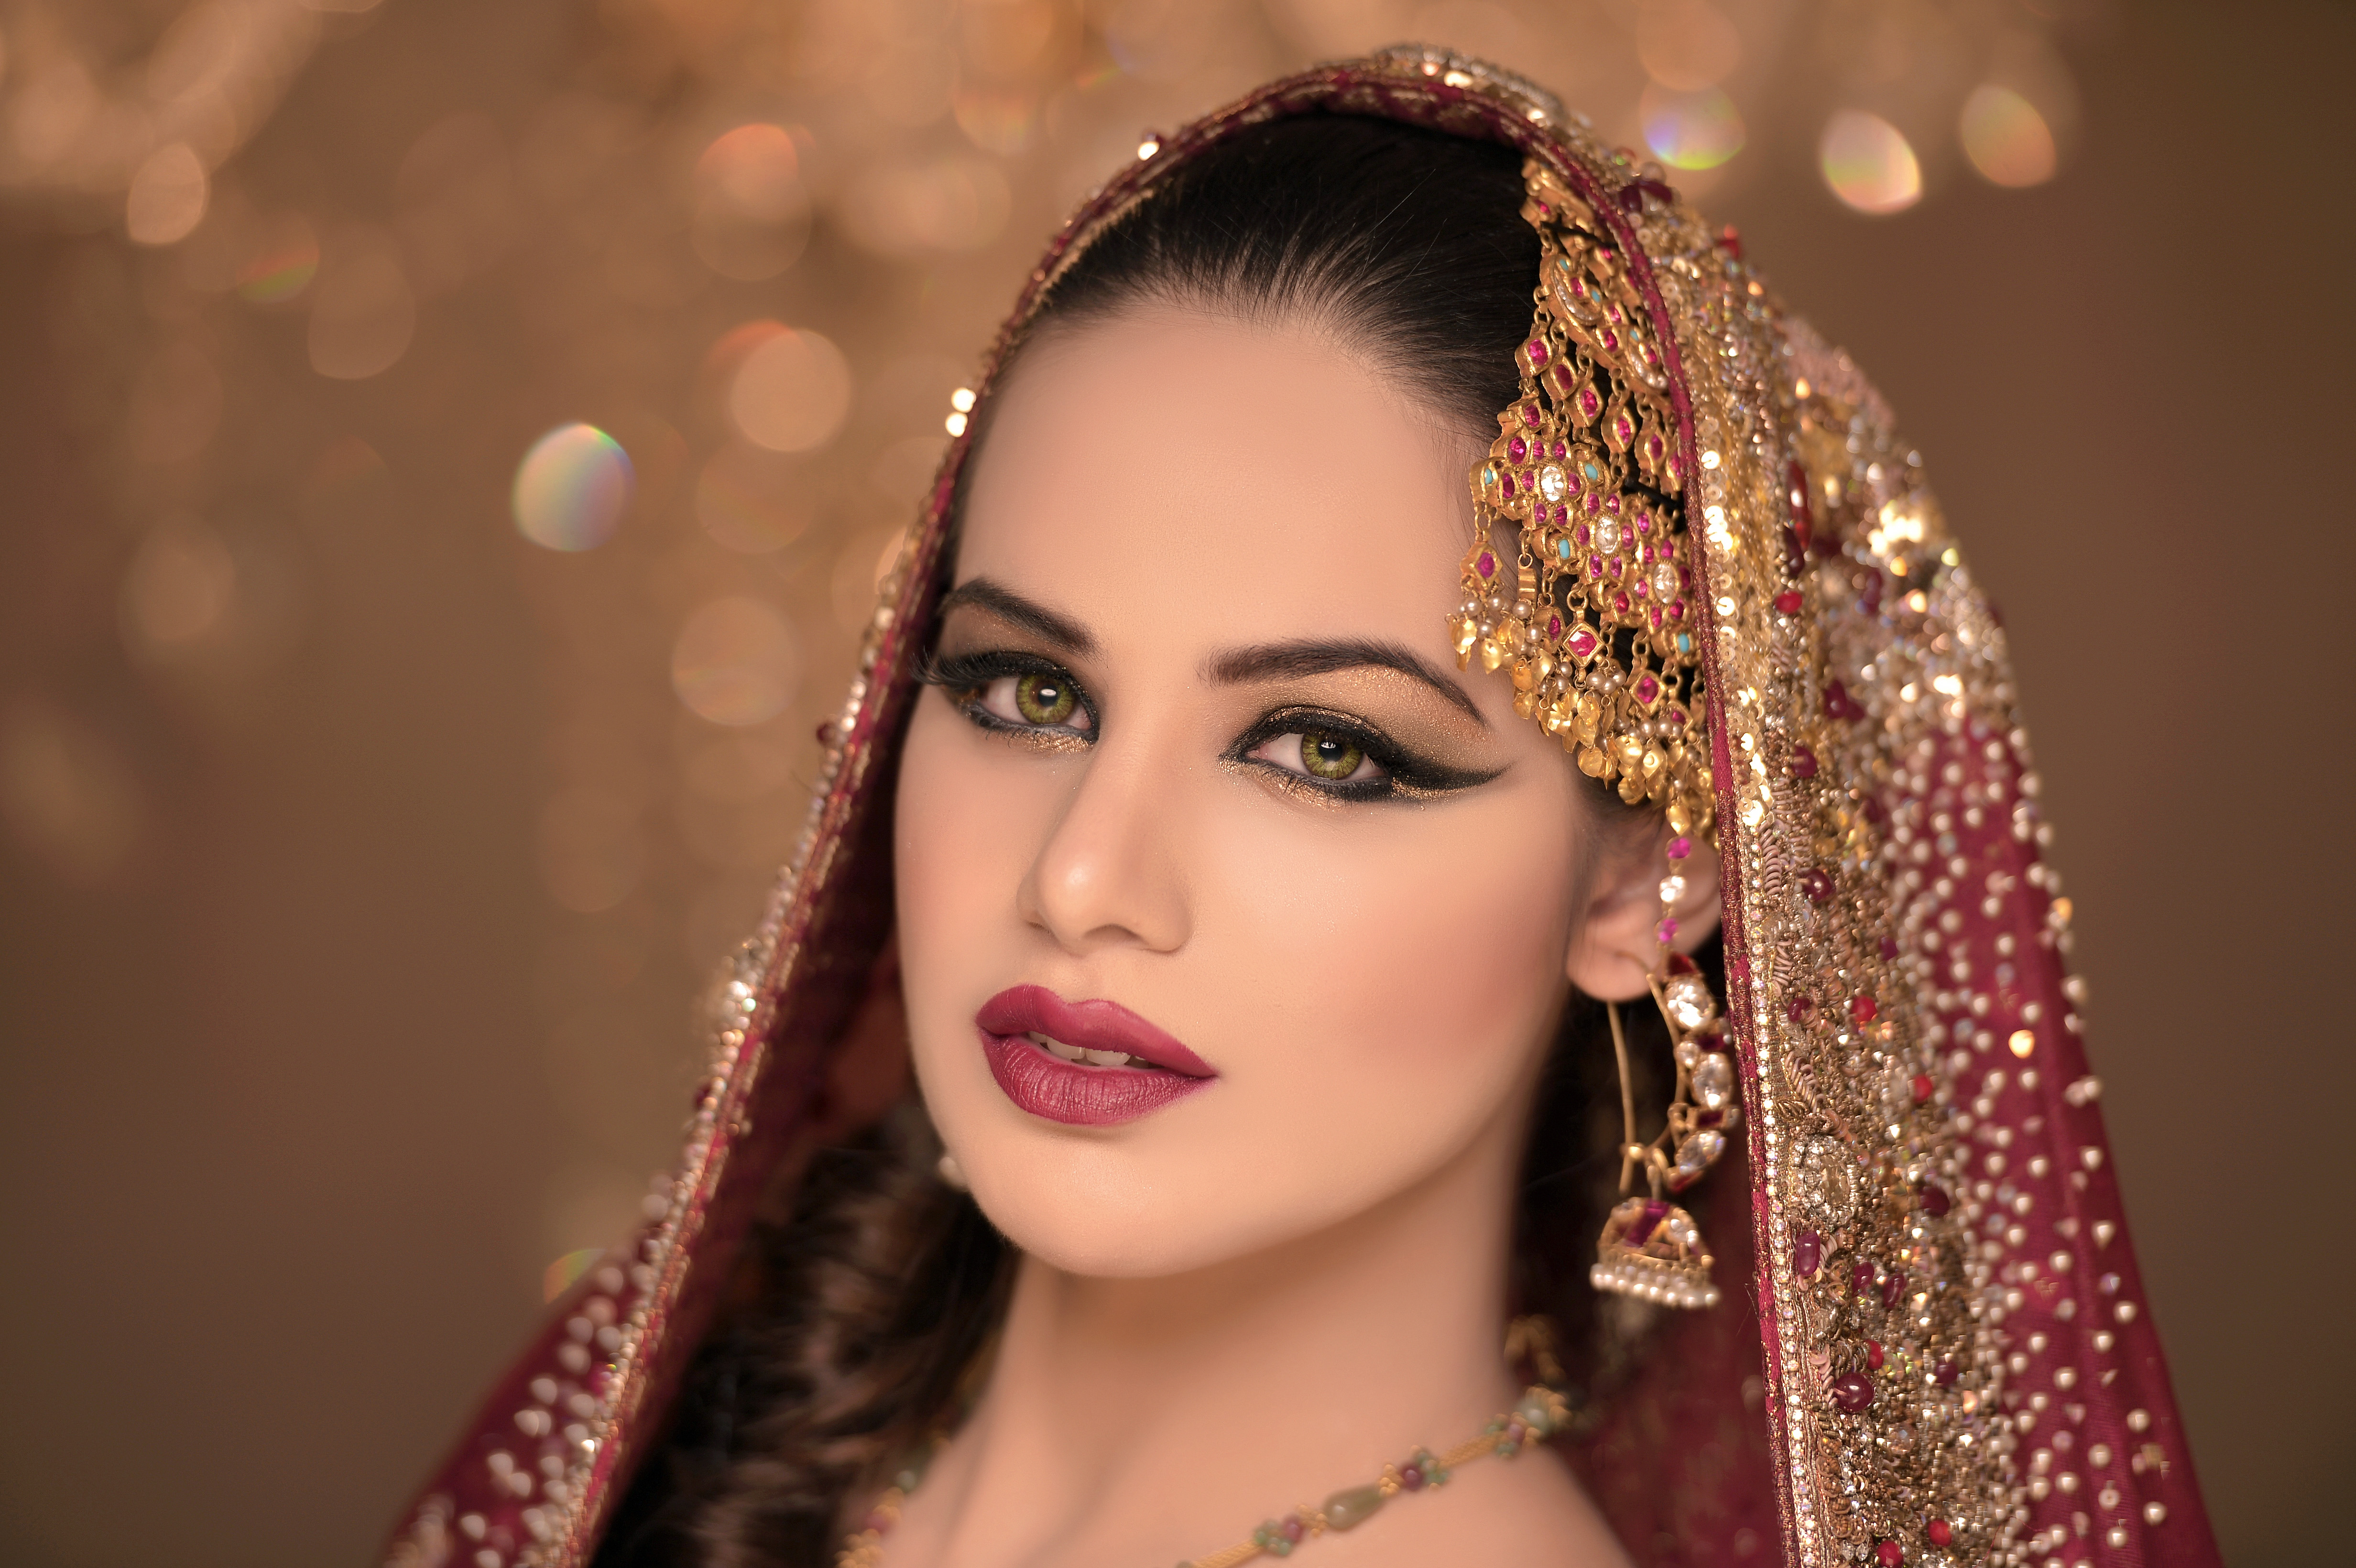 Cosmos Beauty Salon Highest Ranked Beauty Salon In Pakistan With 30 Years Of Experience